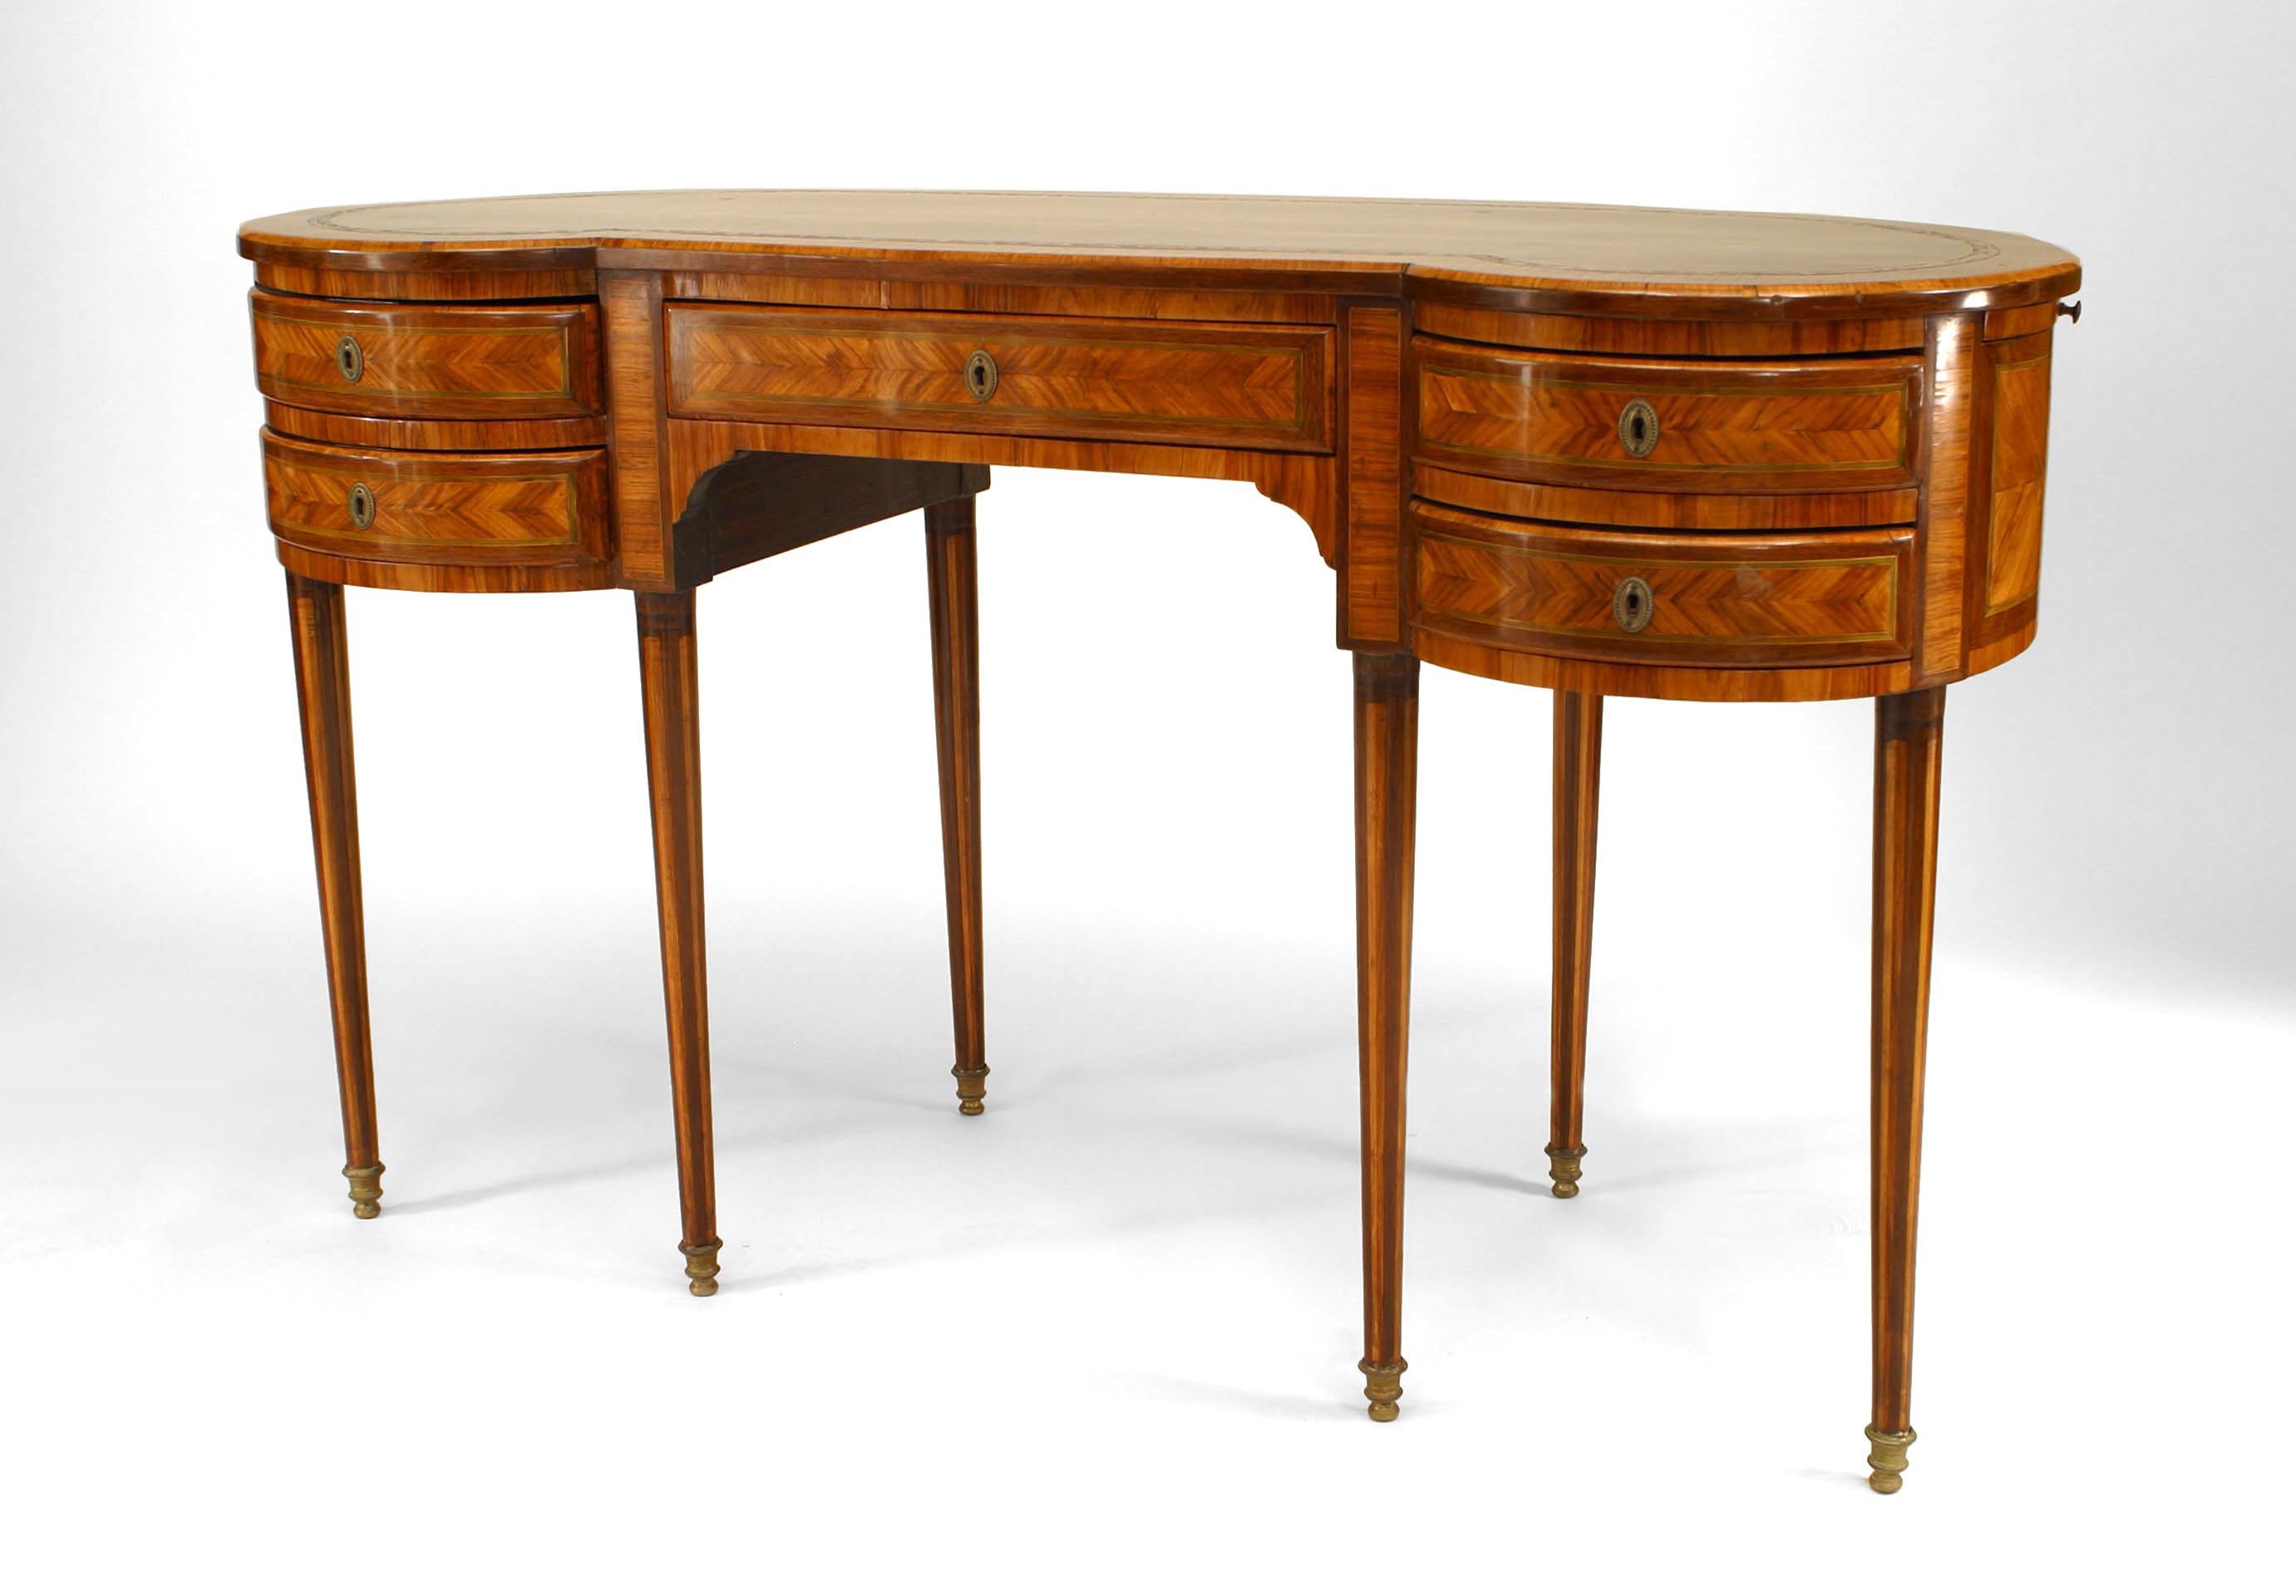 French Louis XVI style (19th Century) satinwood and inlaid 6 legged kidney shaped desk with side slides.
